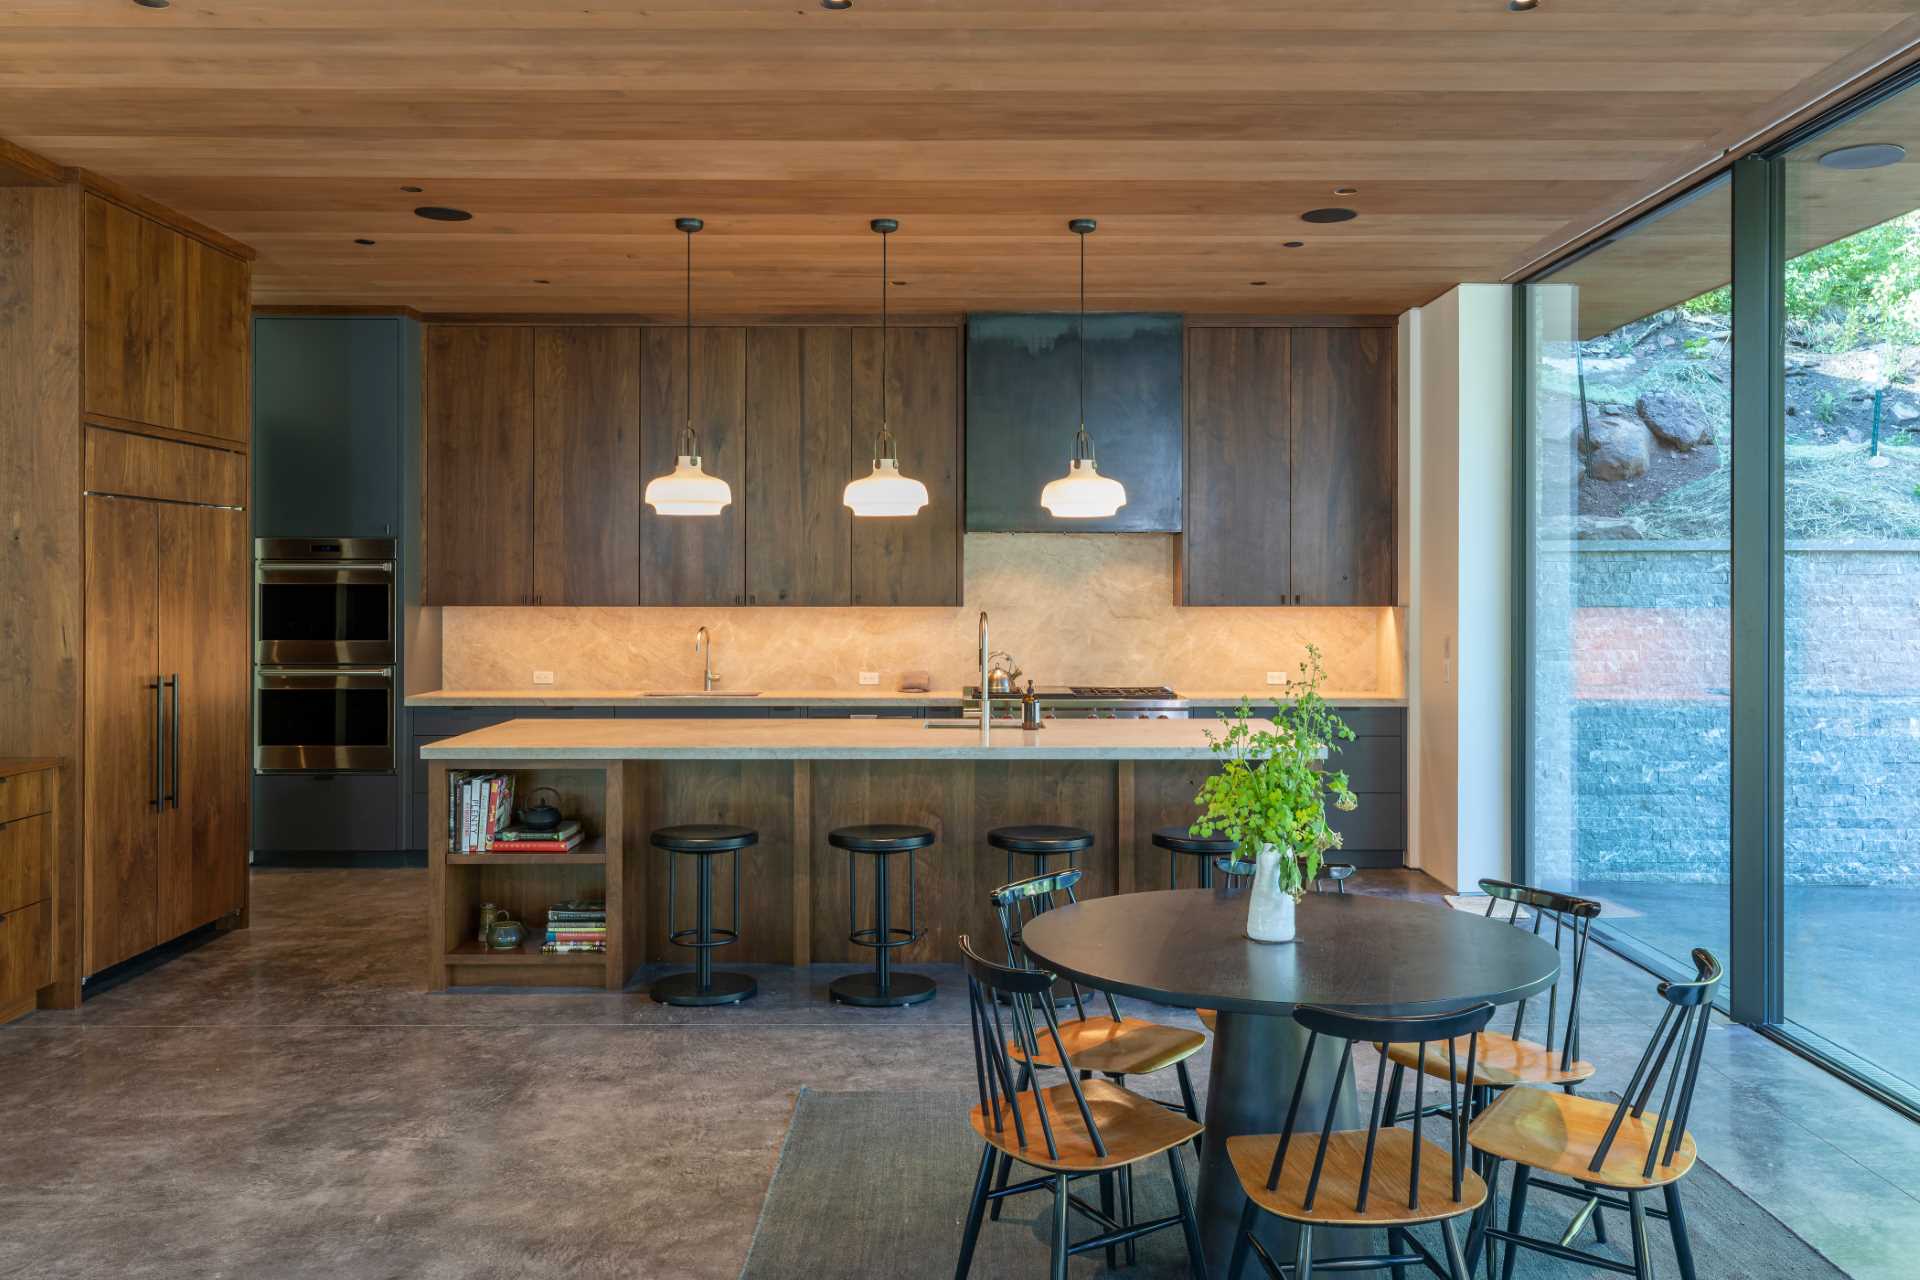 This modern kitchen features dark wood cabinetry with an island.